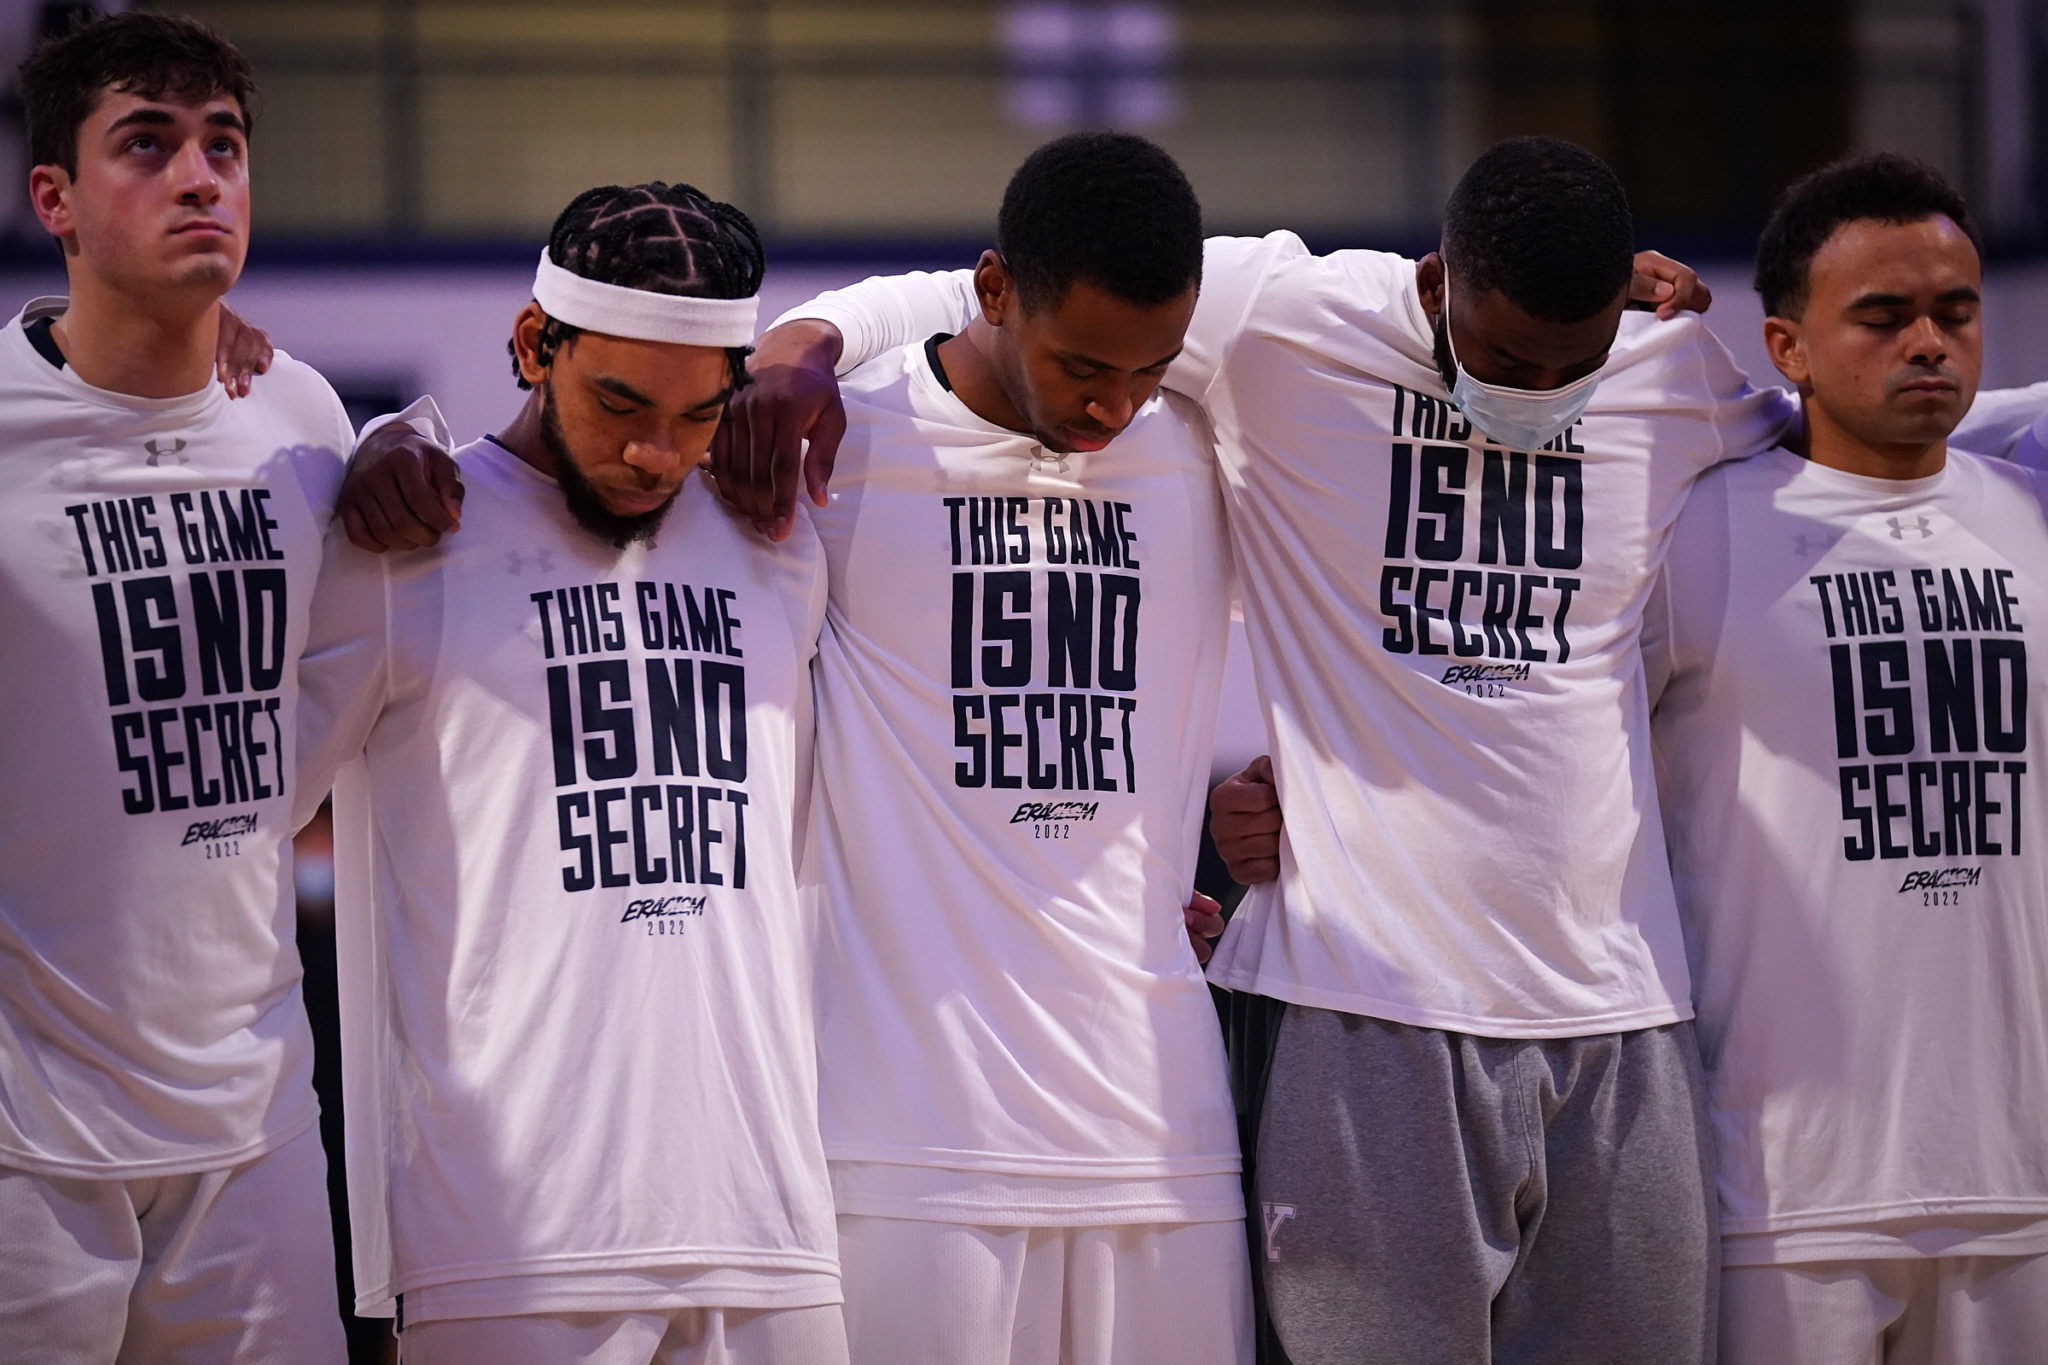 MEN'S BASKETBALL: “This Game is No Secret:” The story behind